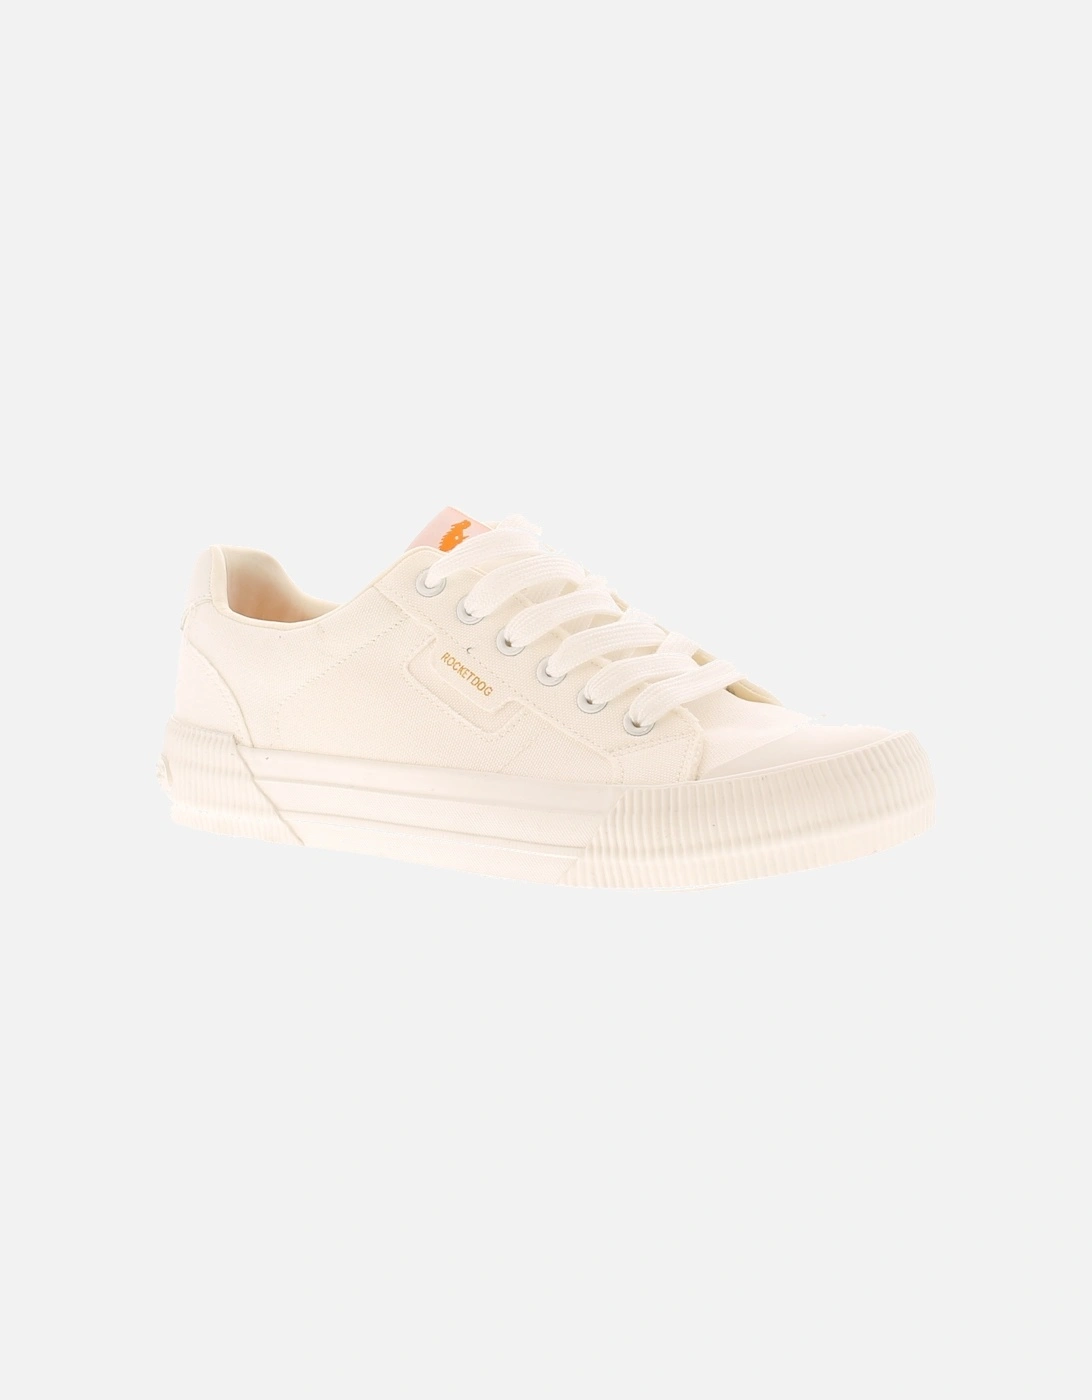 Womens Trainers Pumps Chunky Cheery Lace Up Off White UK Size, 6 of 5